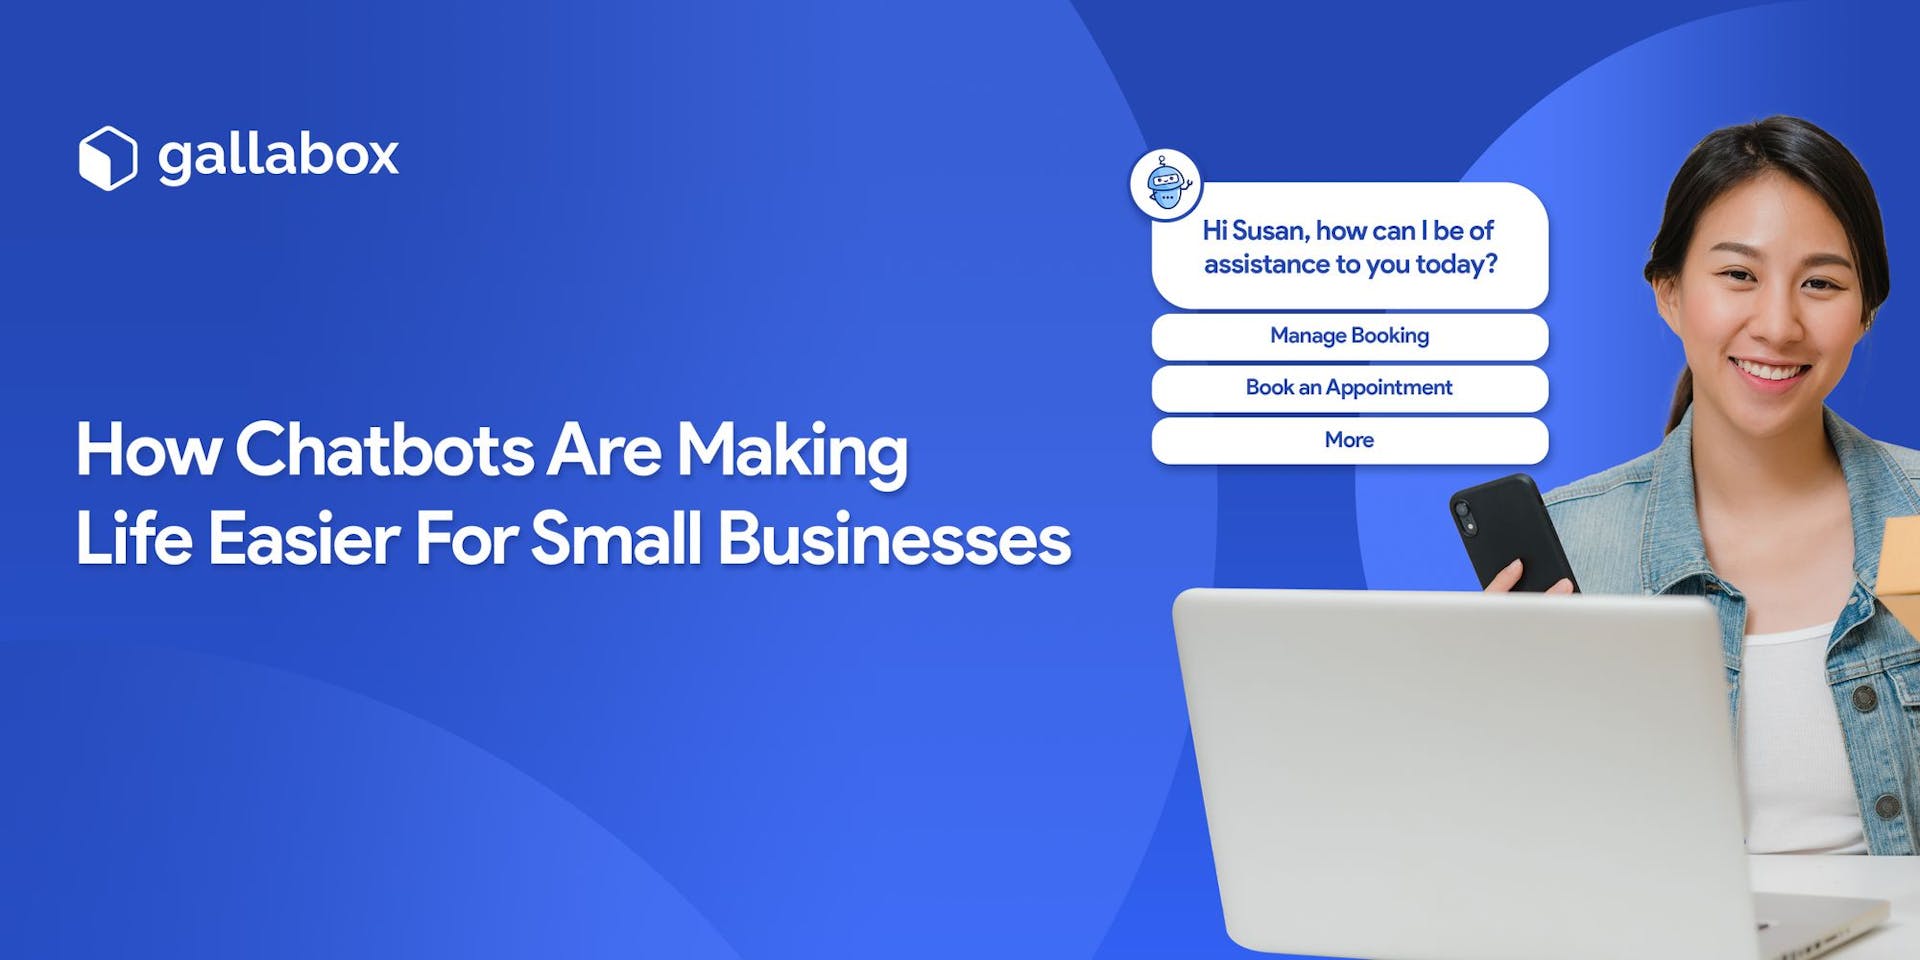 How Chatbots Are Making Life Easier For Small Businesses